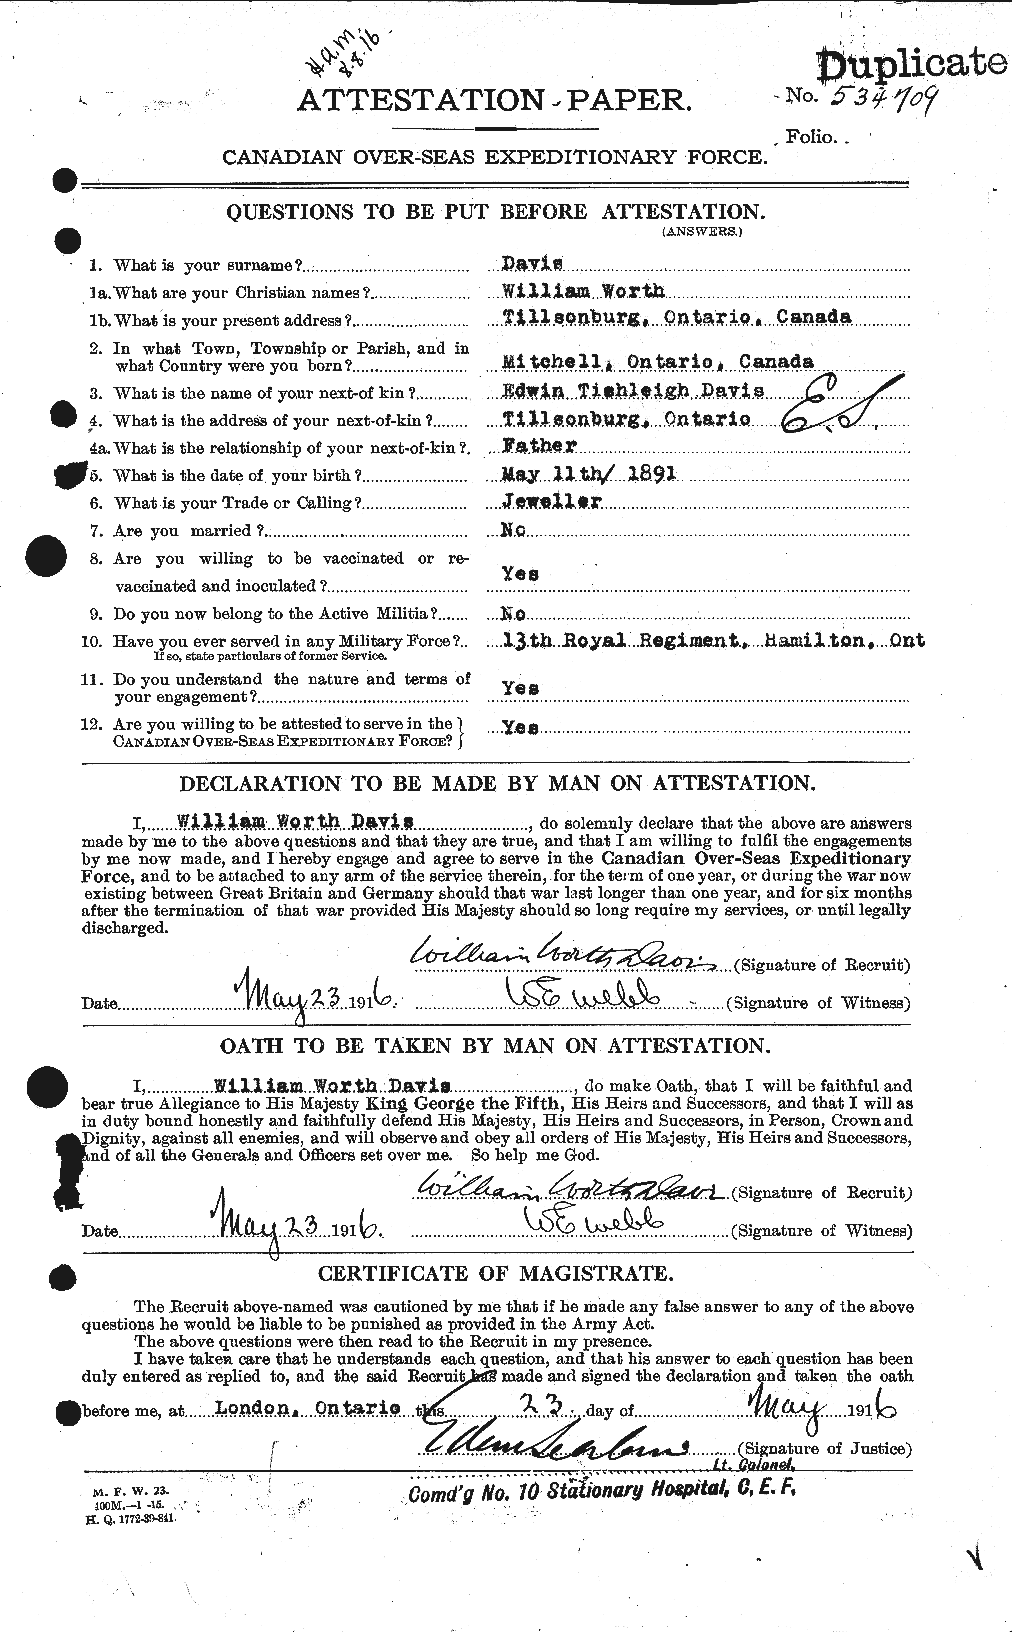 Personnel Records of the First World War - CEF 282379a